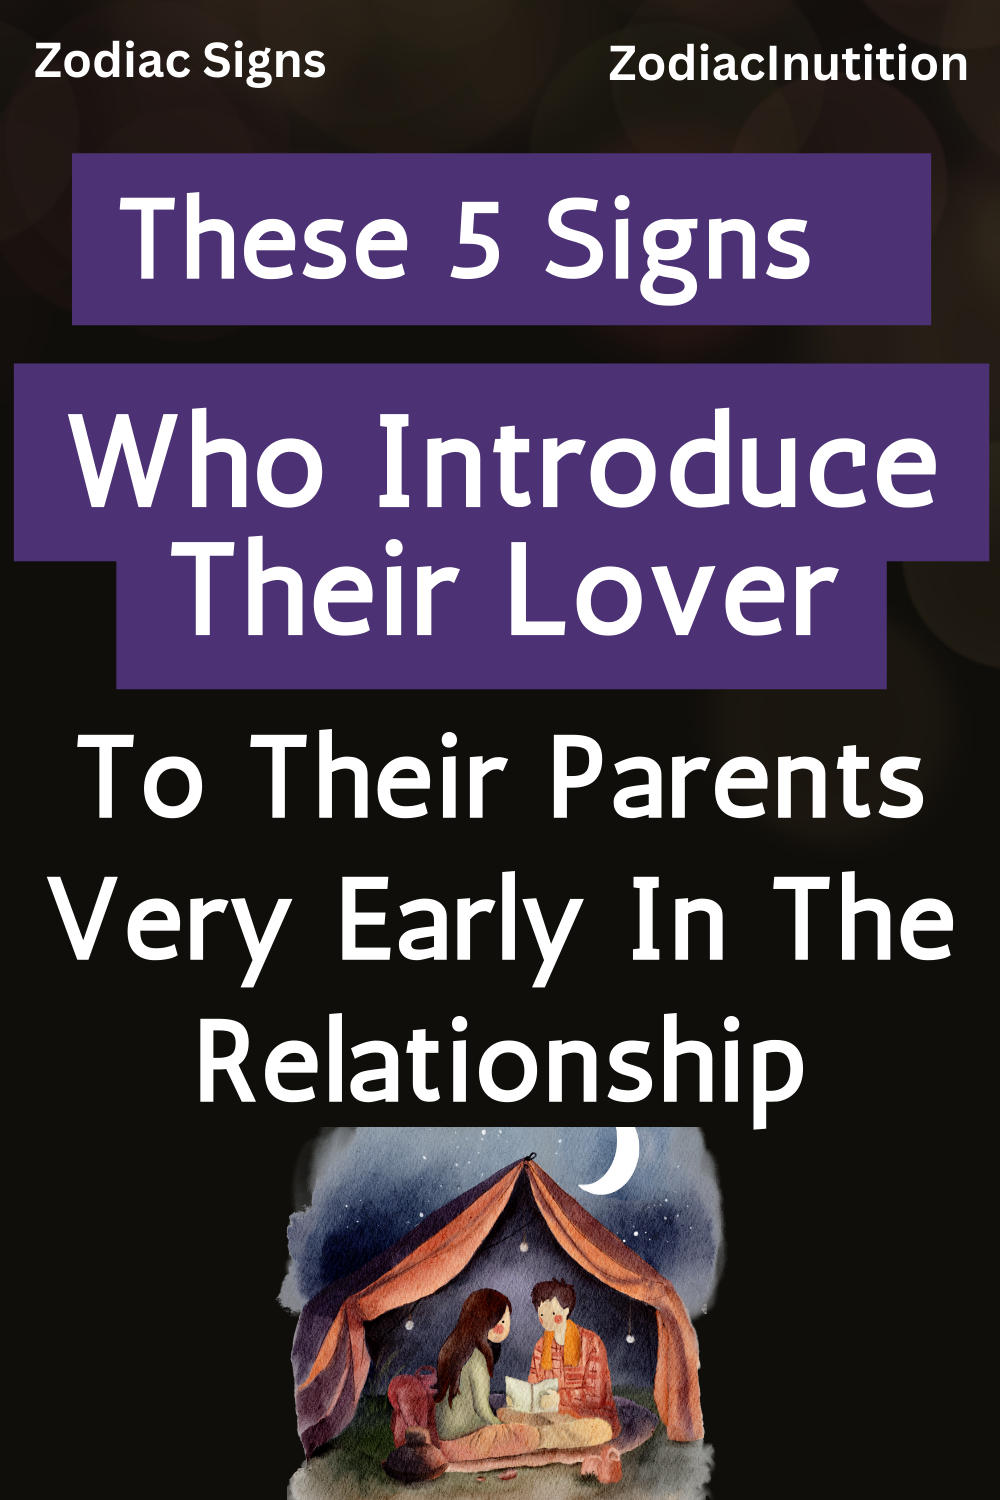 These 5 Signs Who Introduce Their Lover To Their Parents Very Early In The Relationship